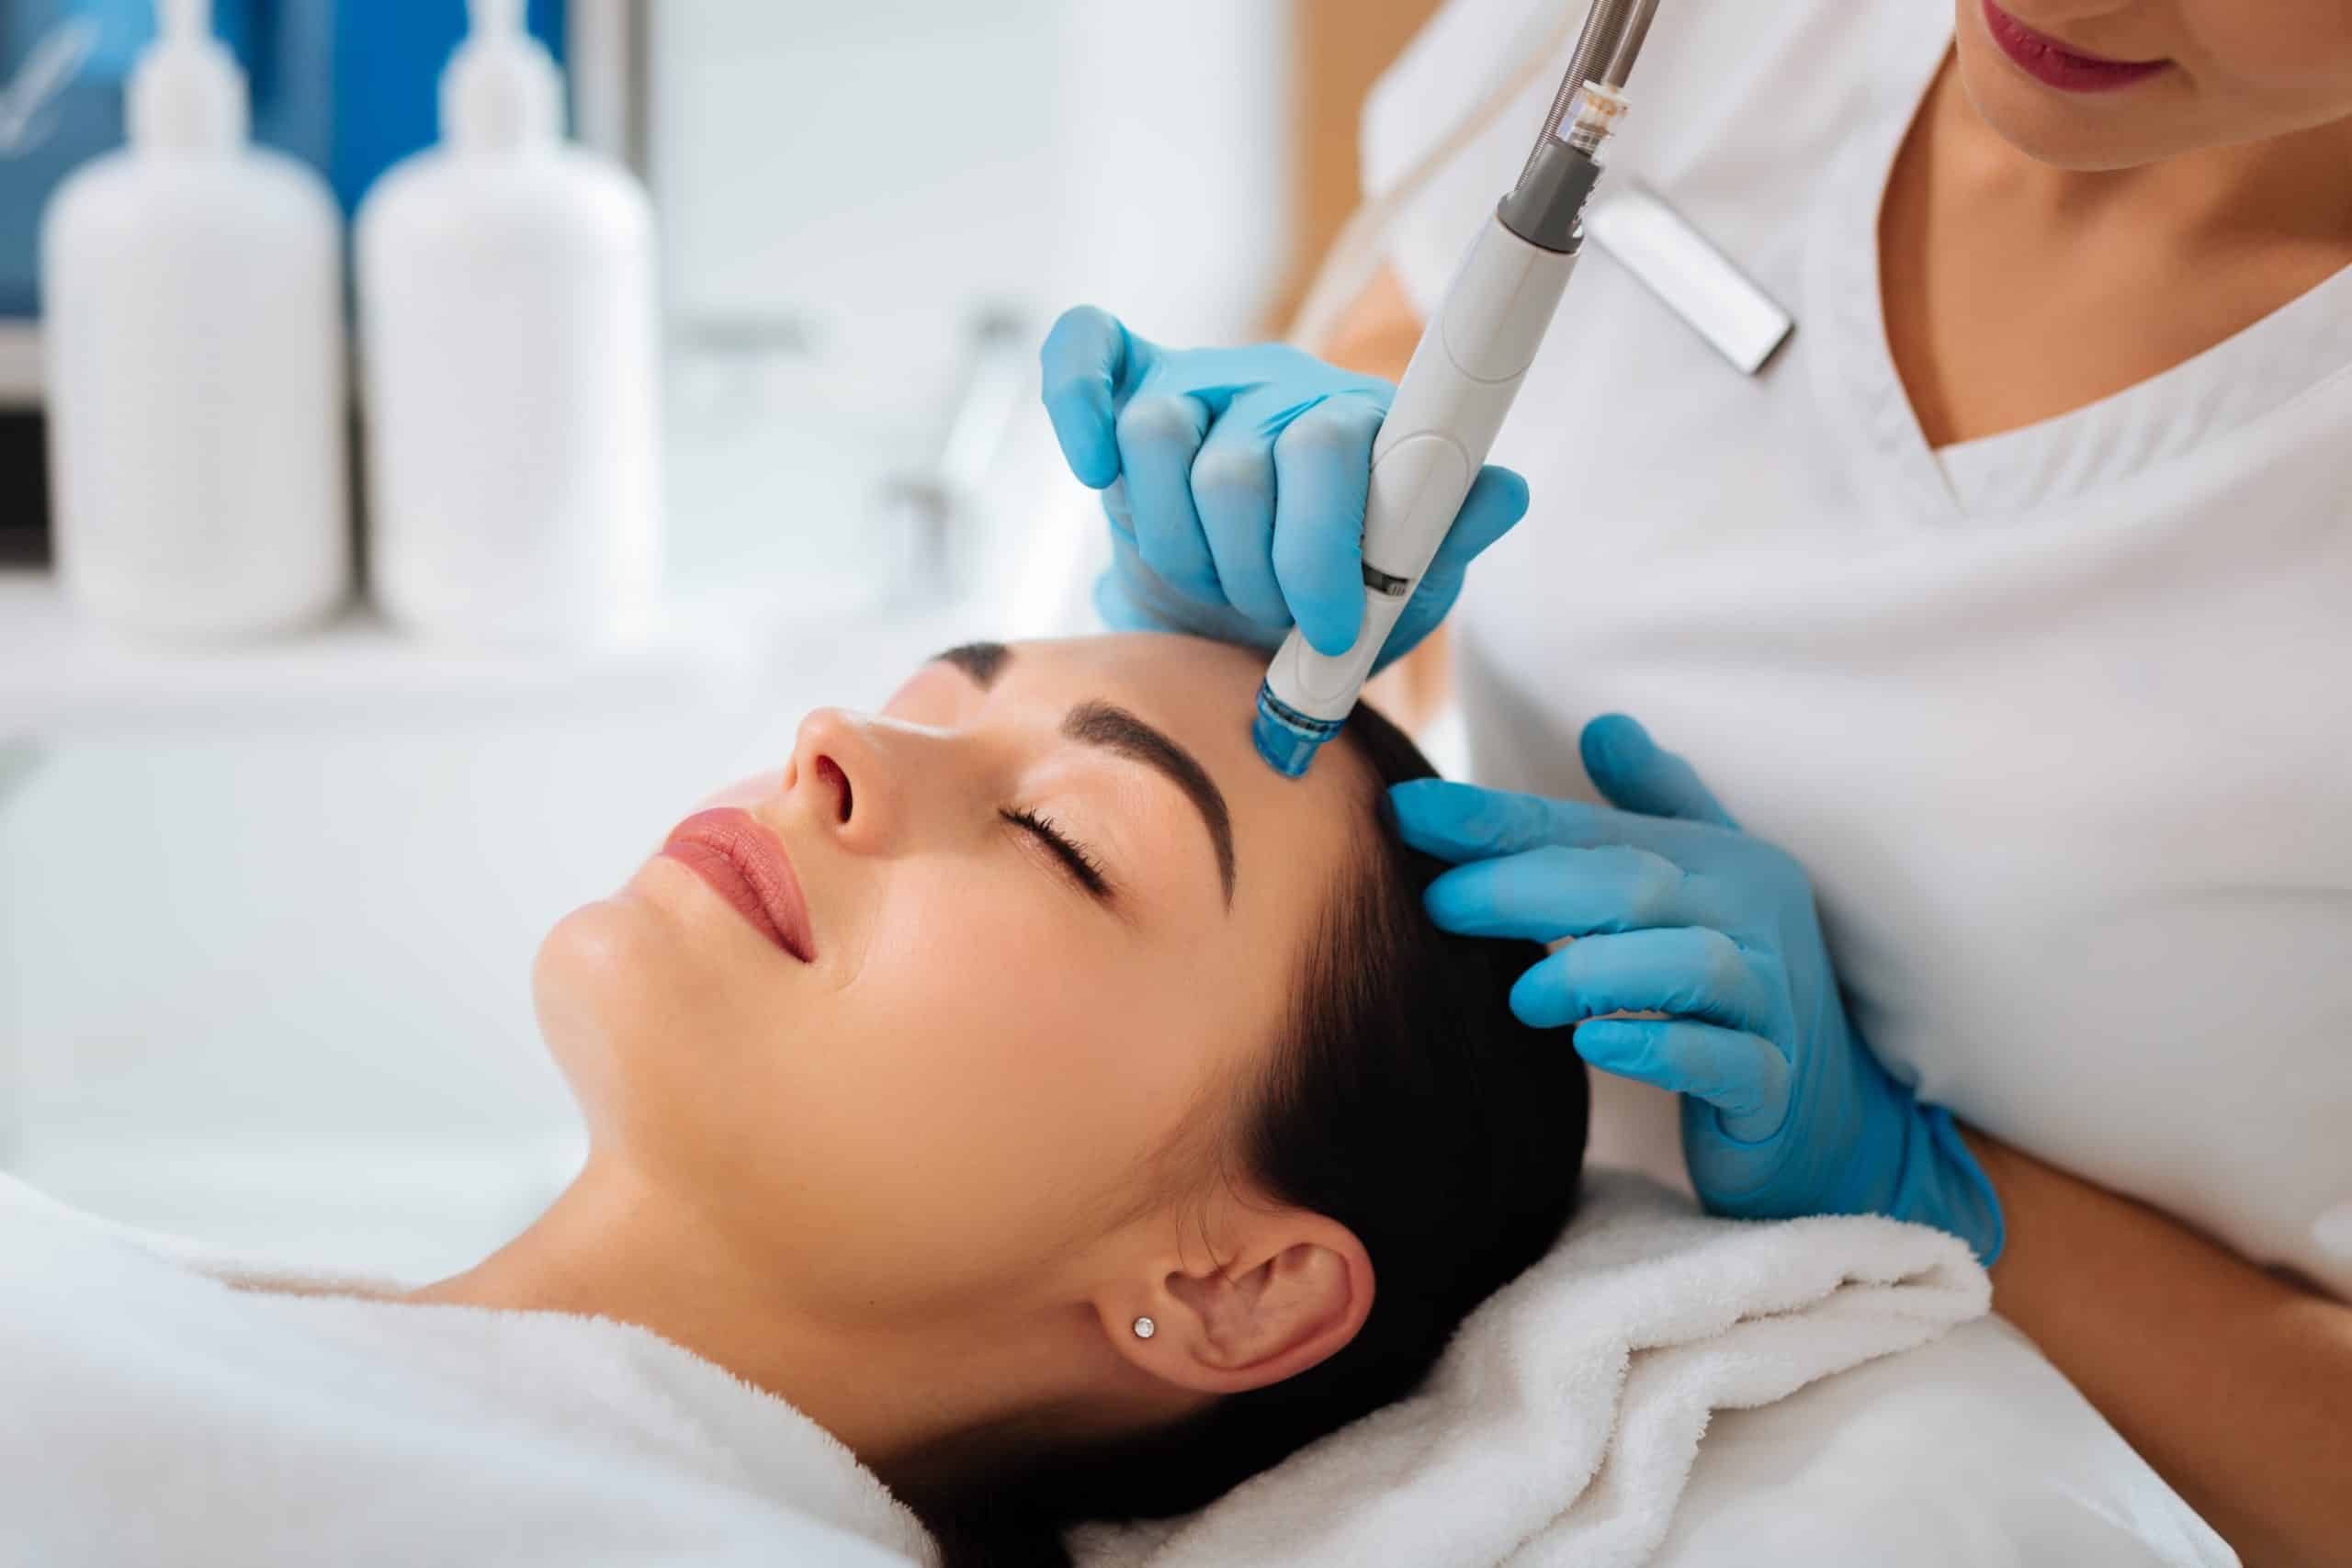 What are The Steps of a HydraFacial